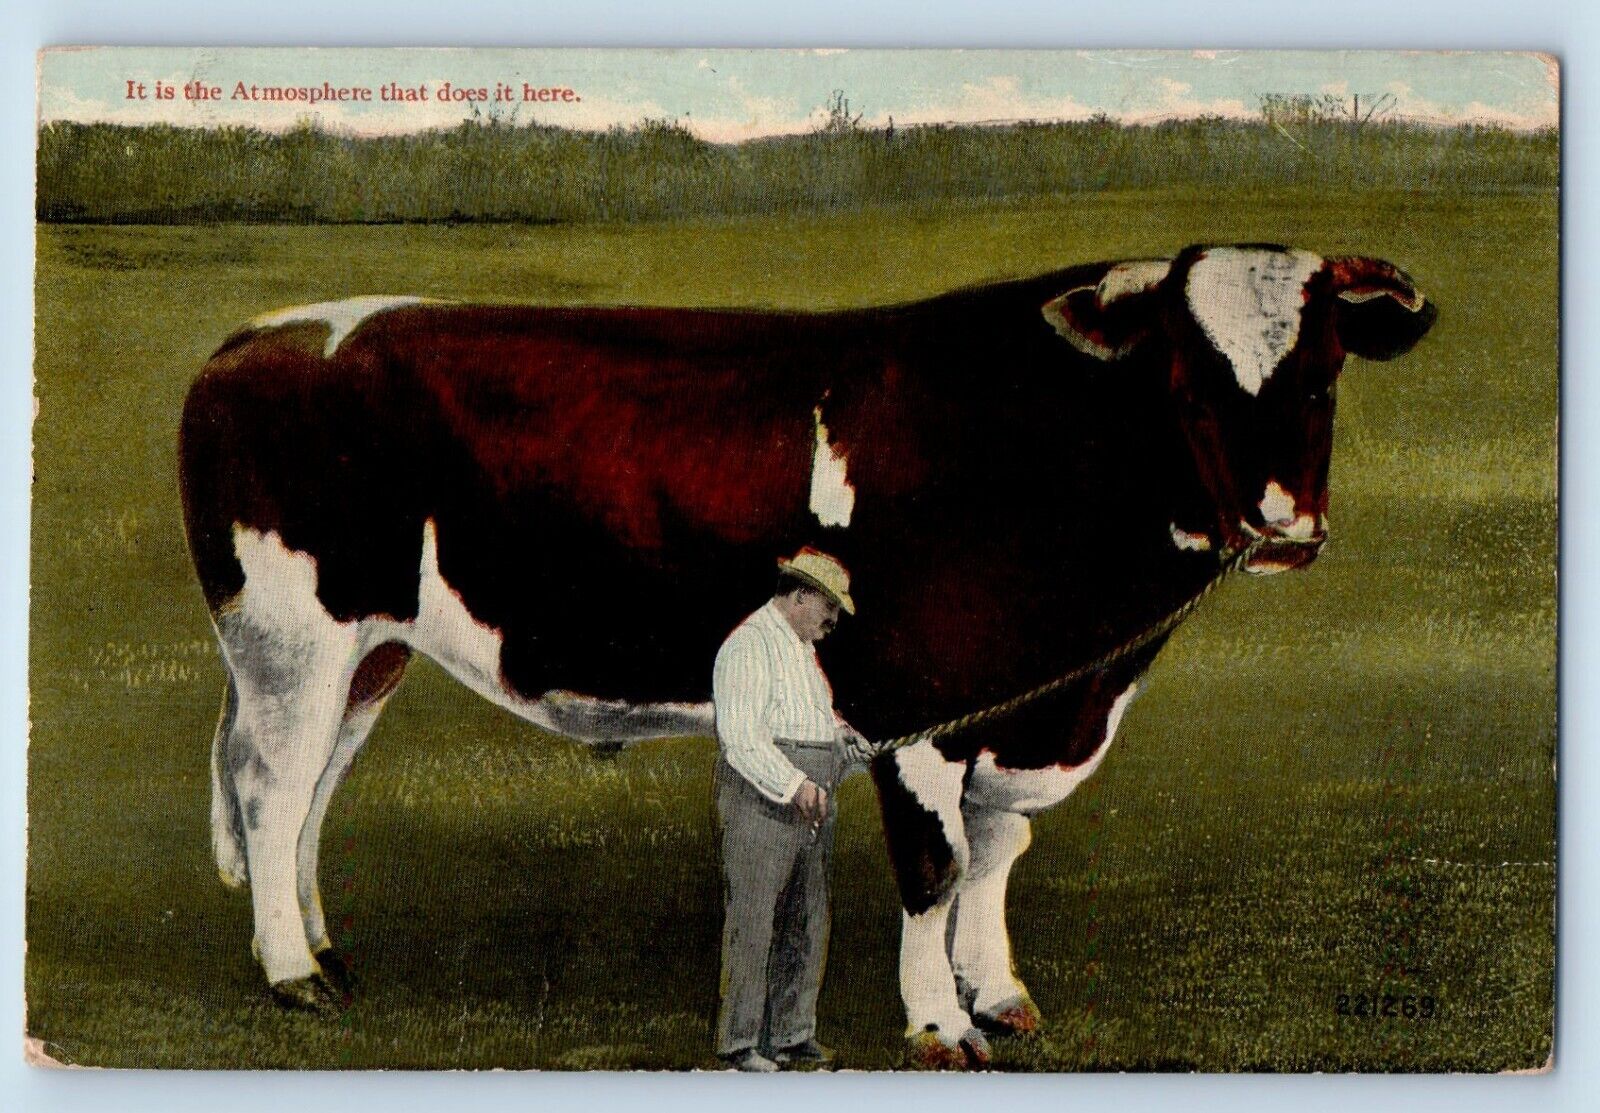 Exaggerated Cow Postcard It Is Atmosphere That Does It Here c190\'s Antique